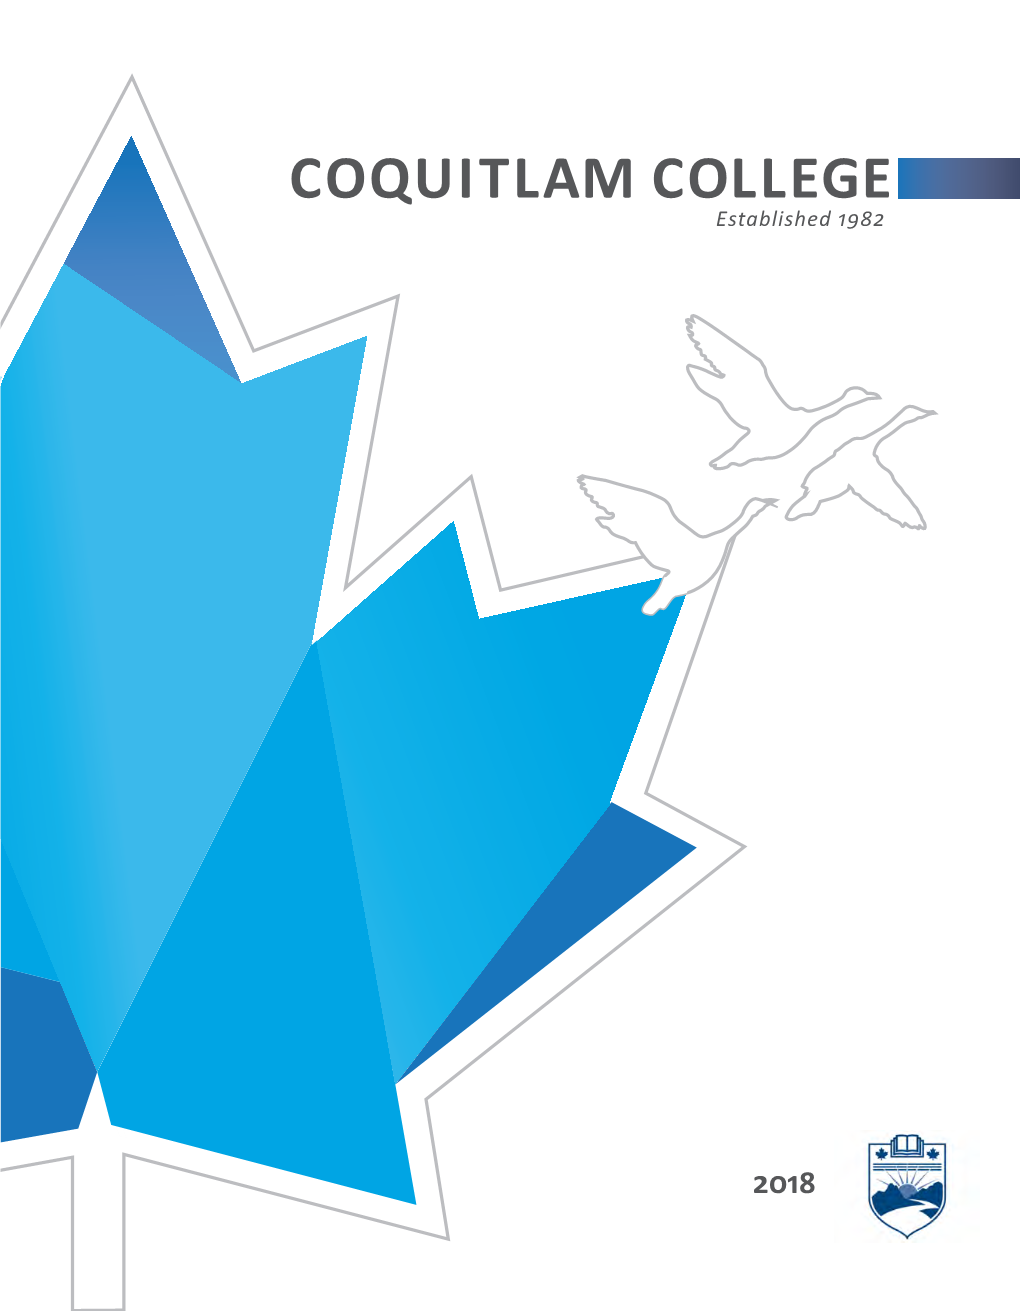 Coquitlam College Is Dedicated to Providing Students of All Nations